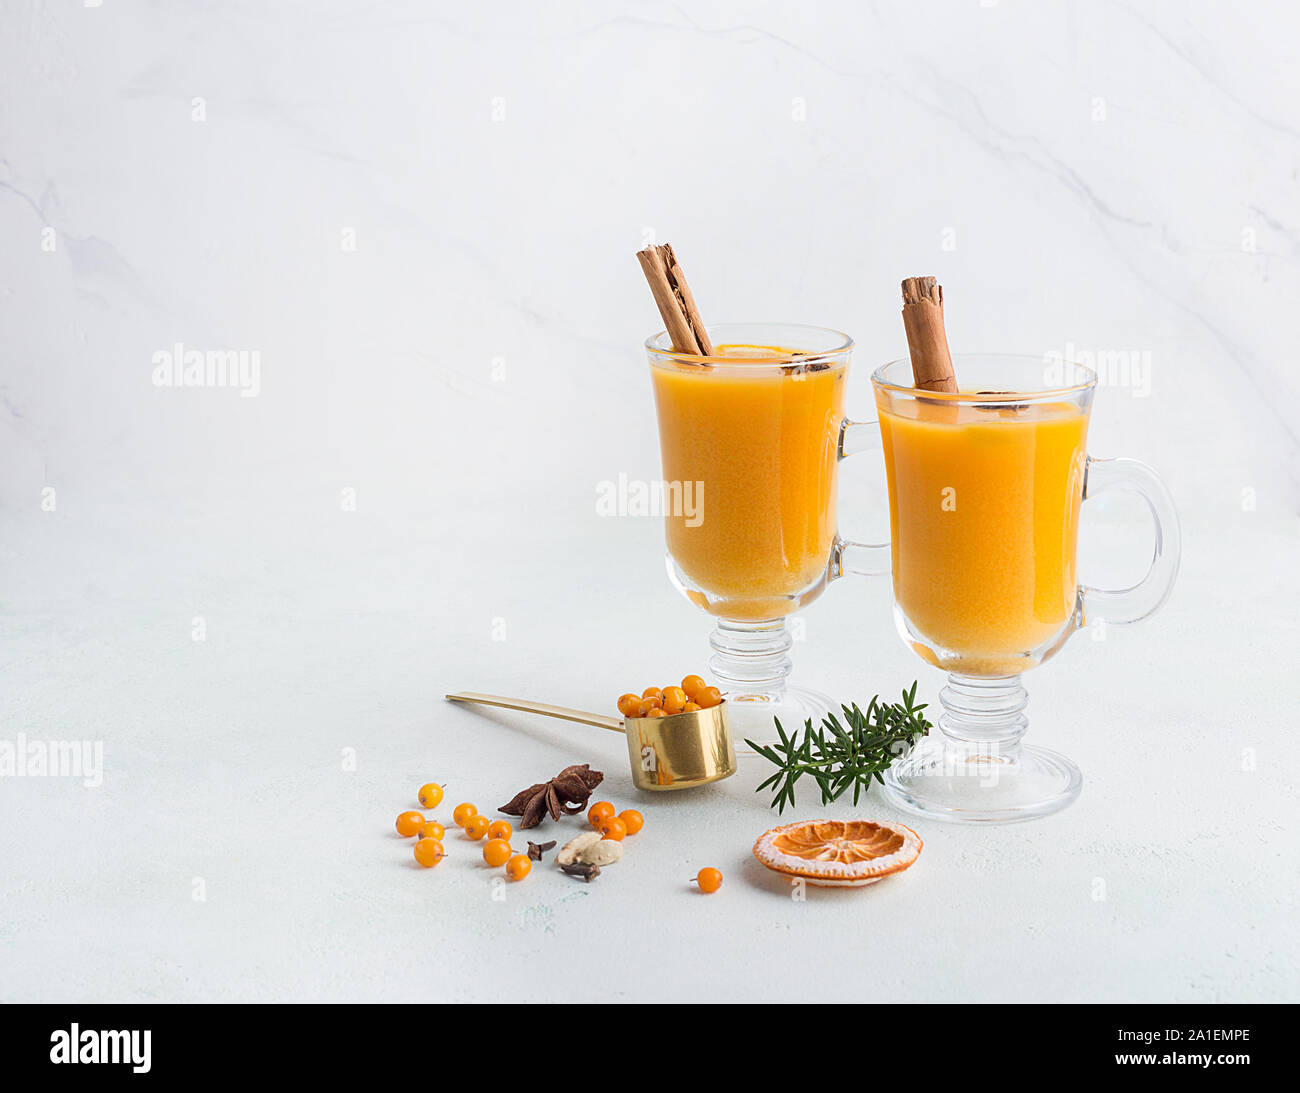 Copy space with sea buckthorn drinks in two glasses on white background for text or logo. Concept of seasonal beverage with copy space Stock Photo